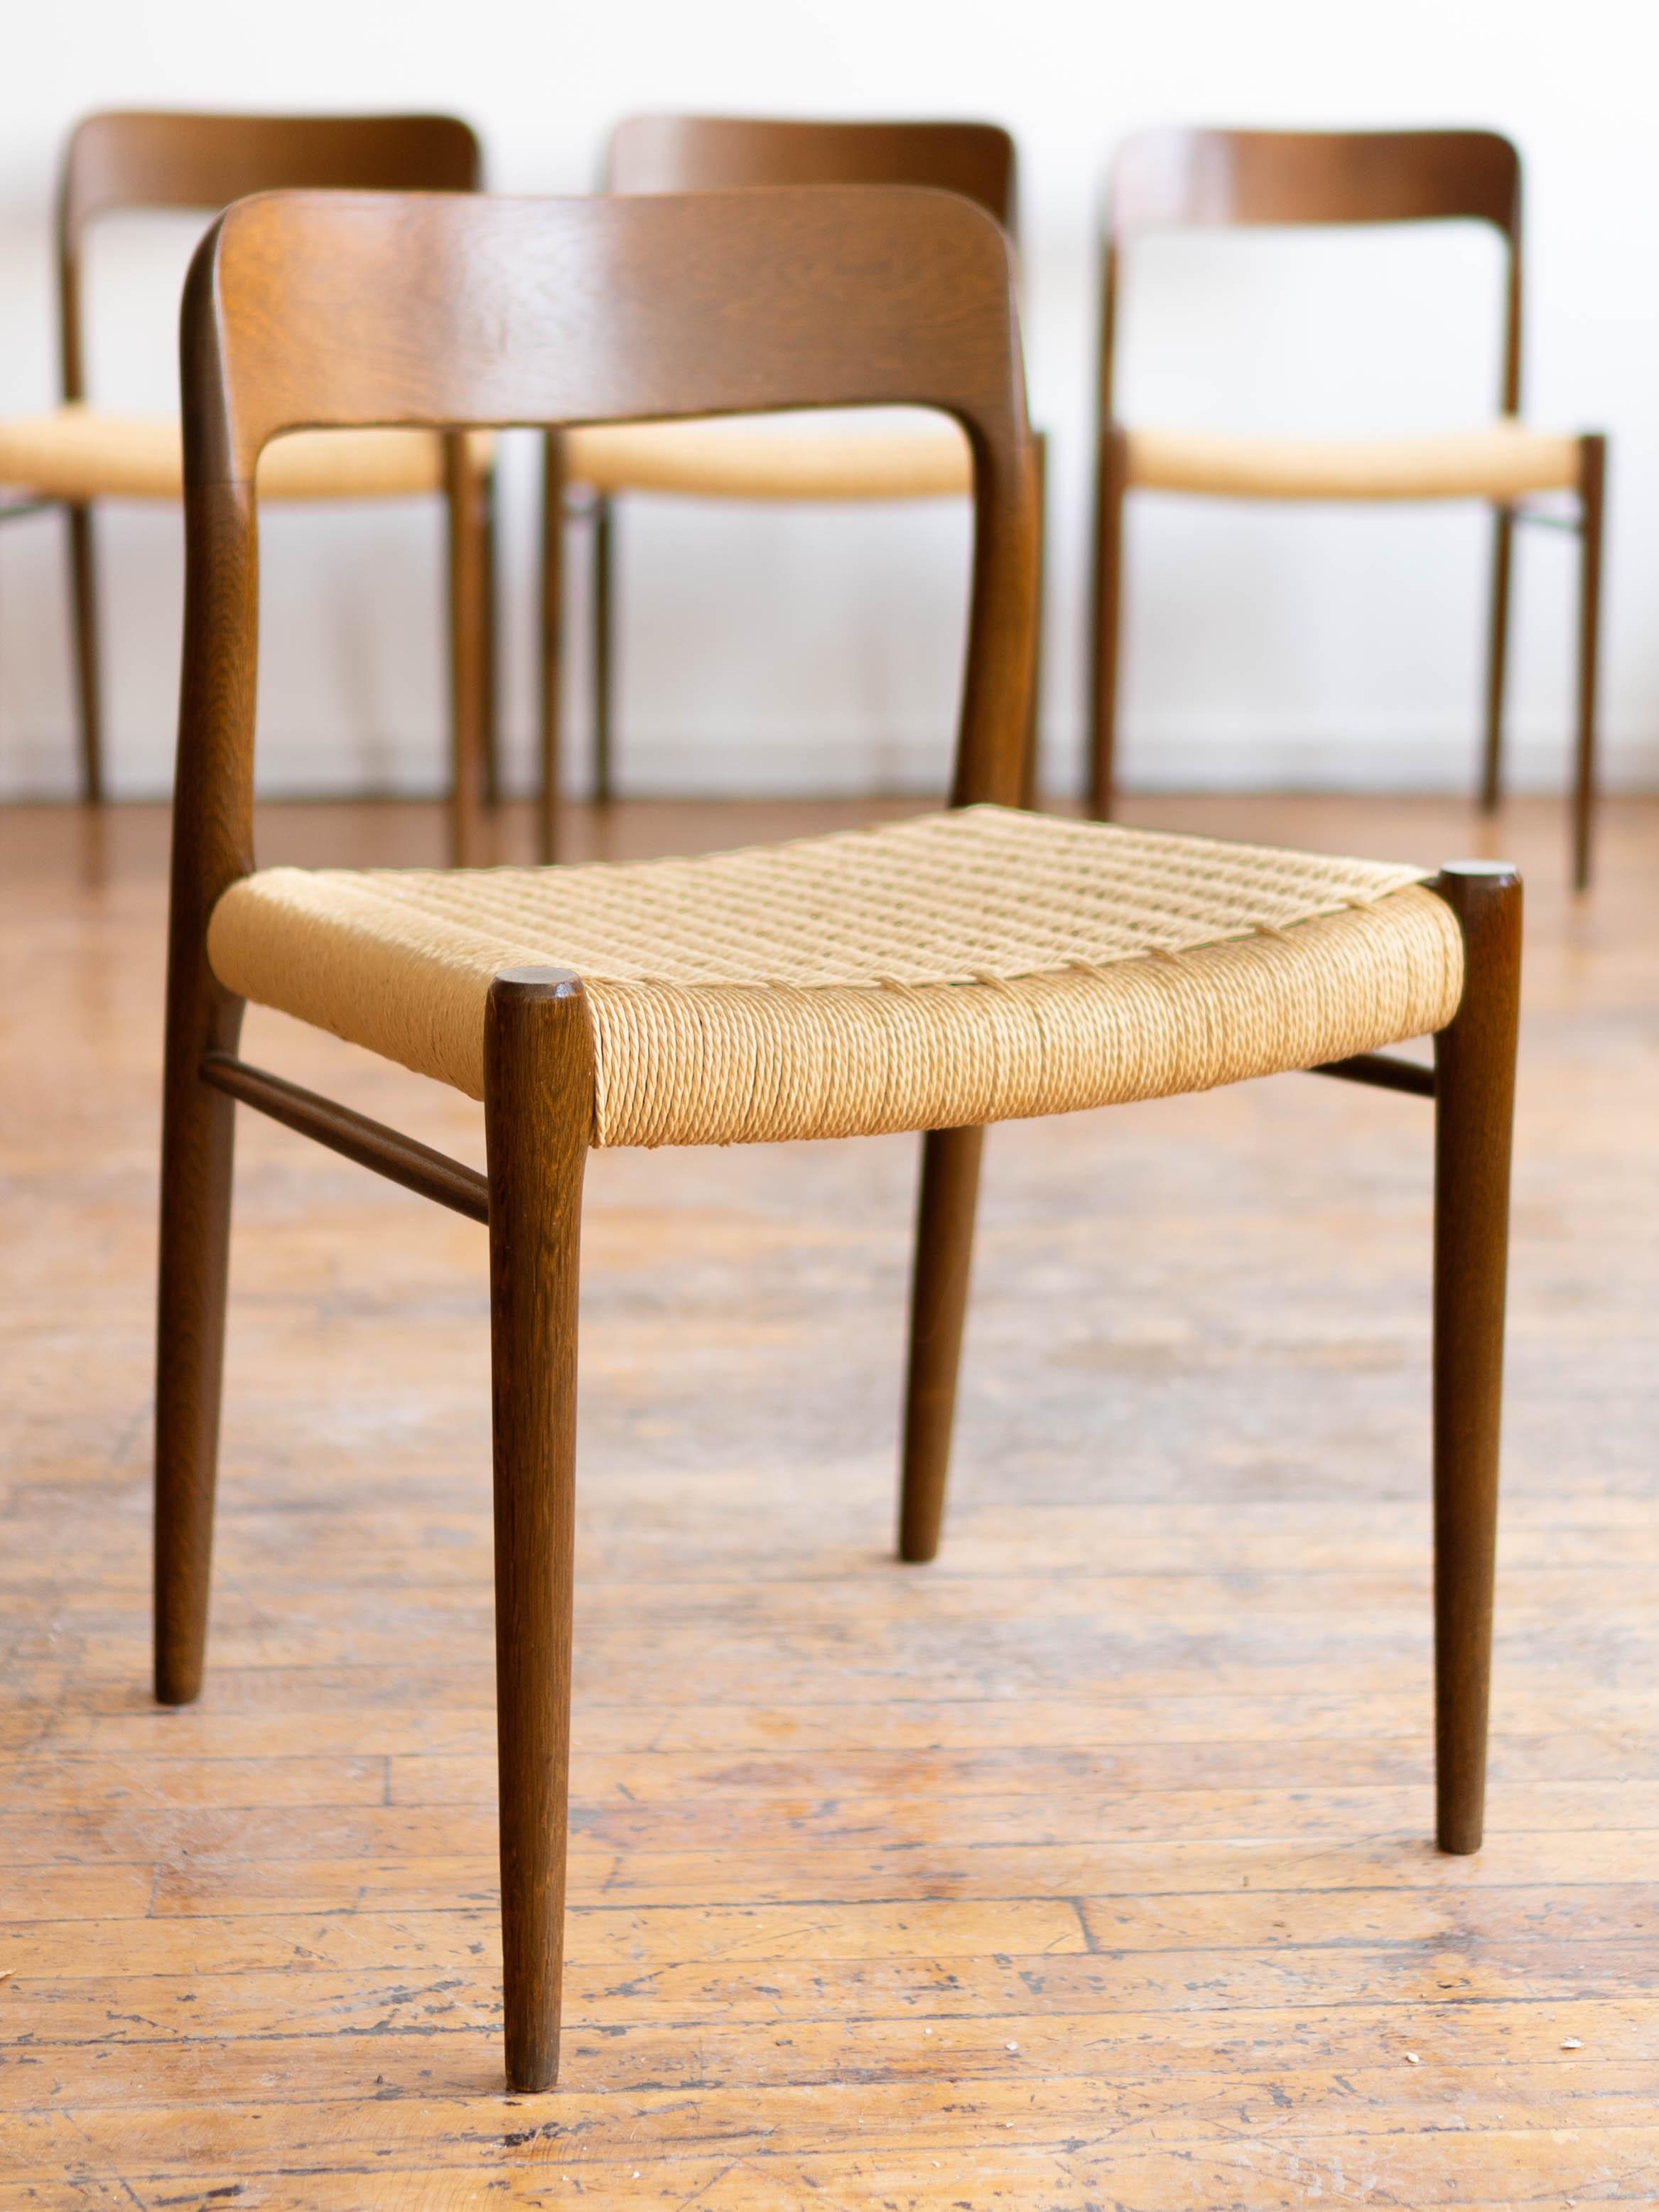 Papercord 1960s Mid-Century Modern Danish Moller 75 Chairs in Wenge Wood - Set of 4